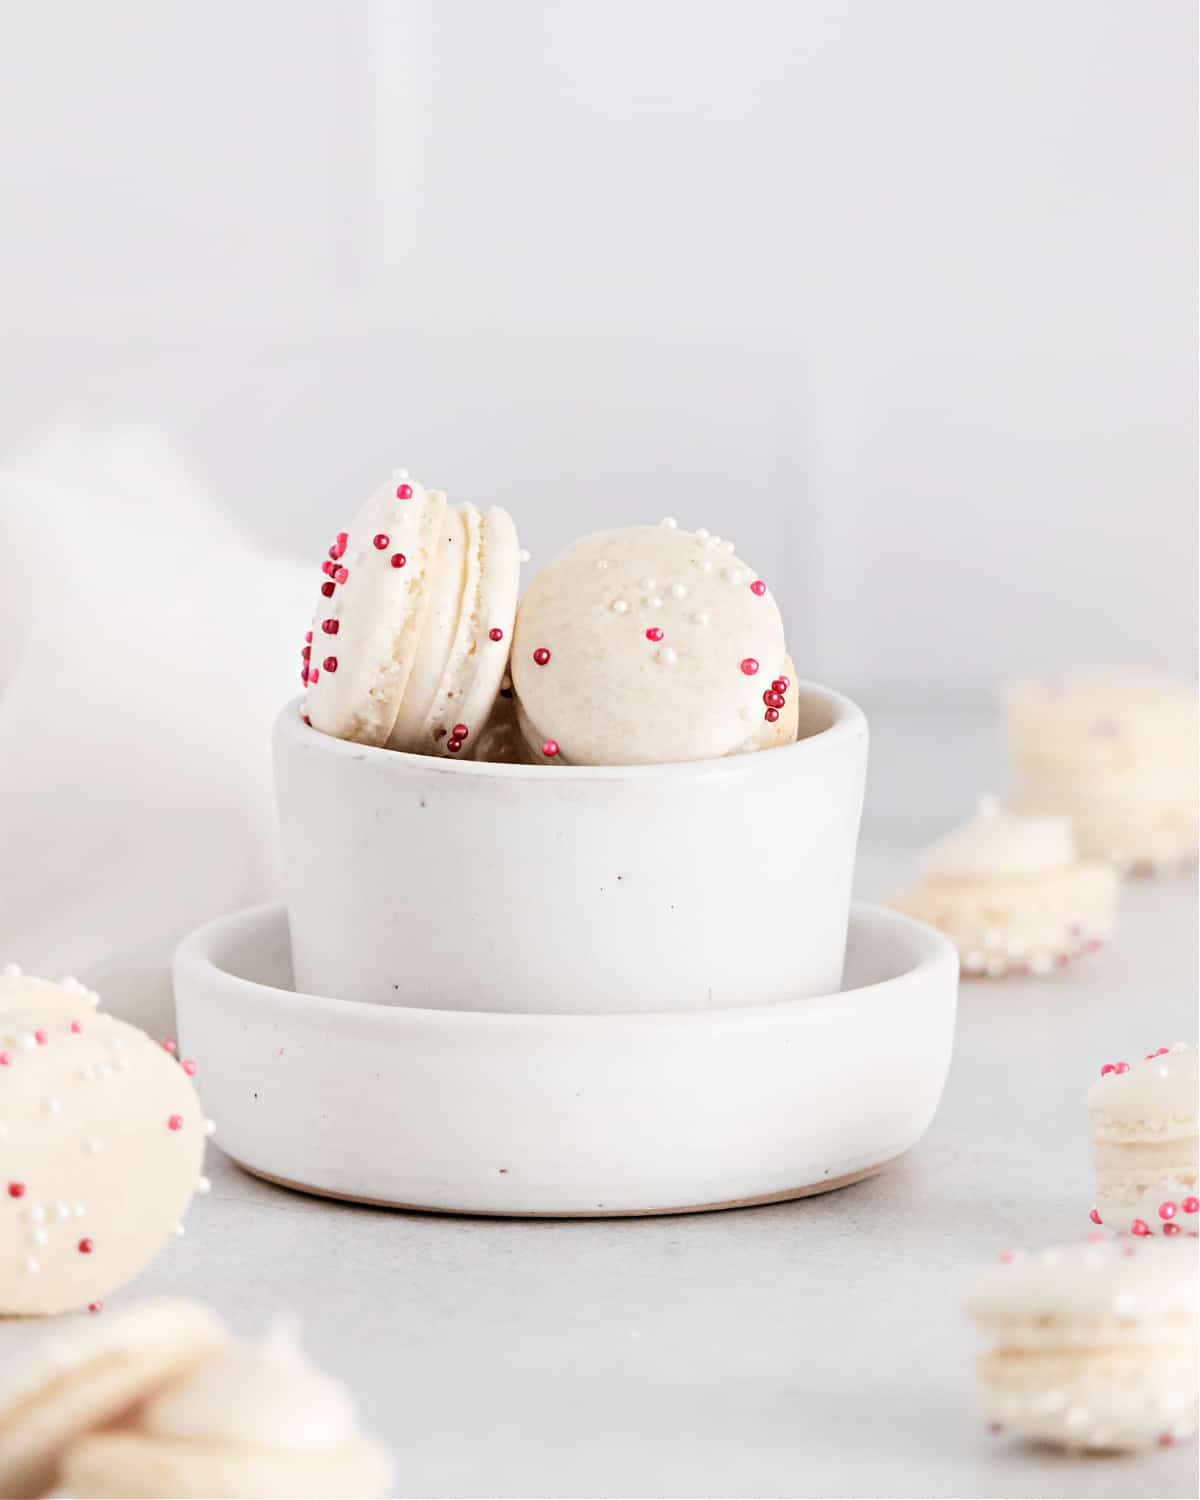 Vanilla macarons in a white bowl with pink sprinkles.